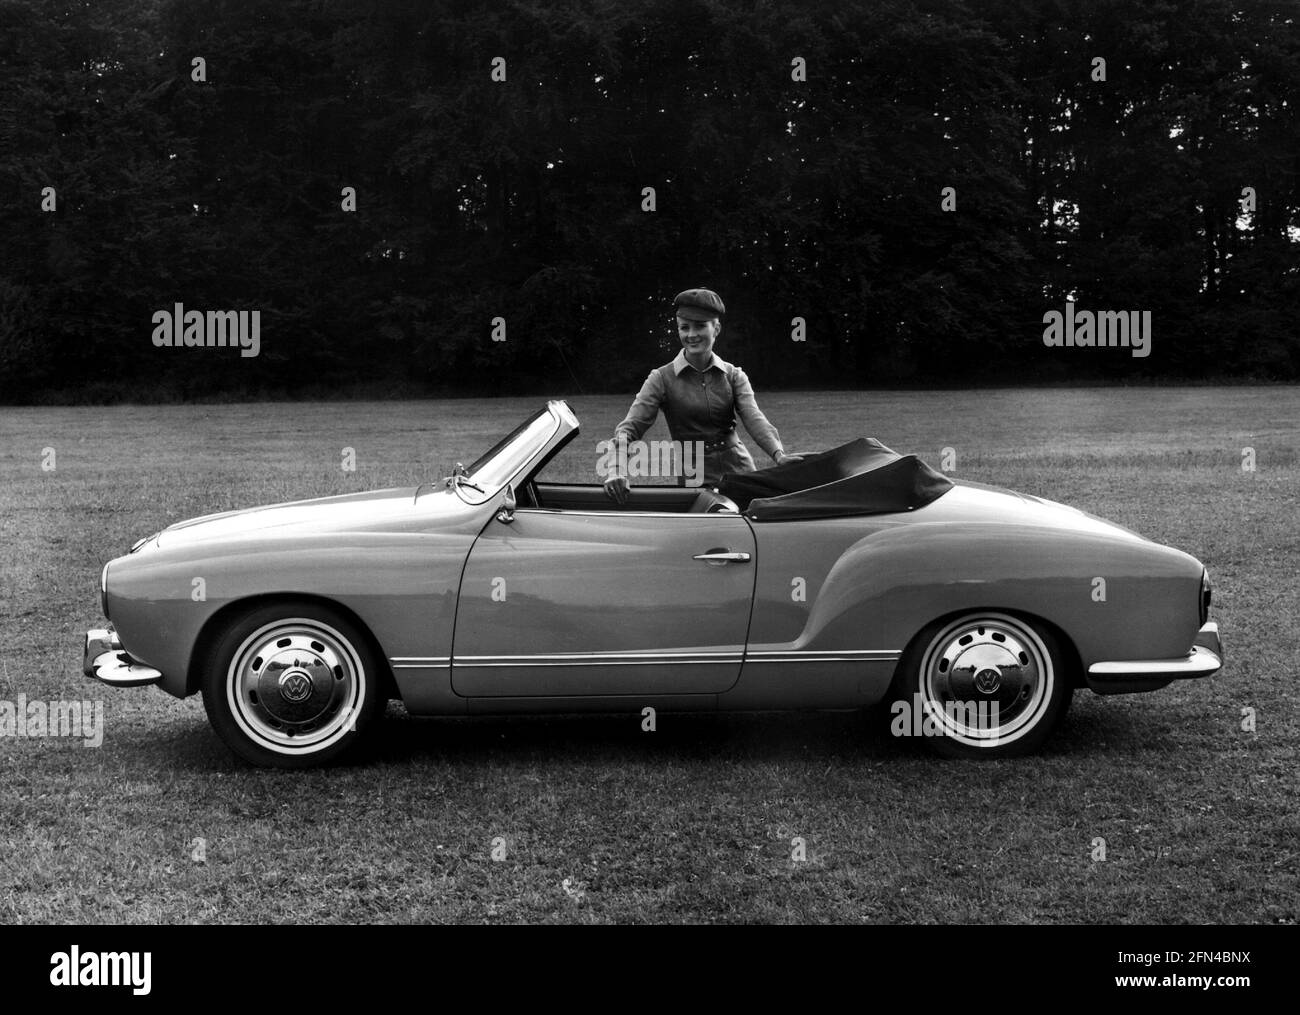 transport / transportation, cars, vehicle variants, Volkswagen, VW 1500 Karmann Ghia Typ 14, ADDITIONAL-RIGHTS-CLEARANCE-INFO-NOT-AVAILABLE Stock Photo